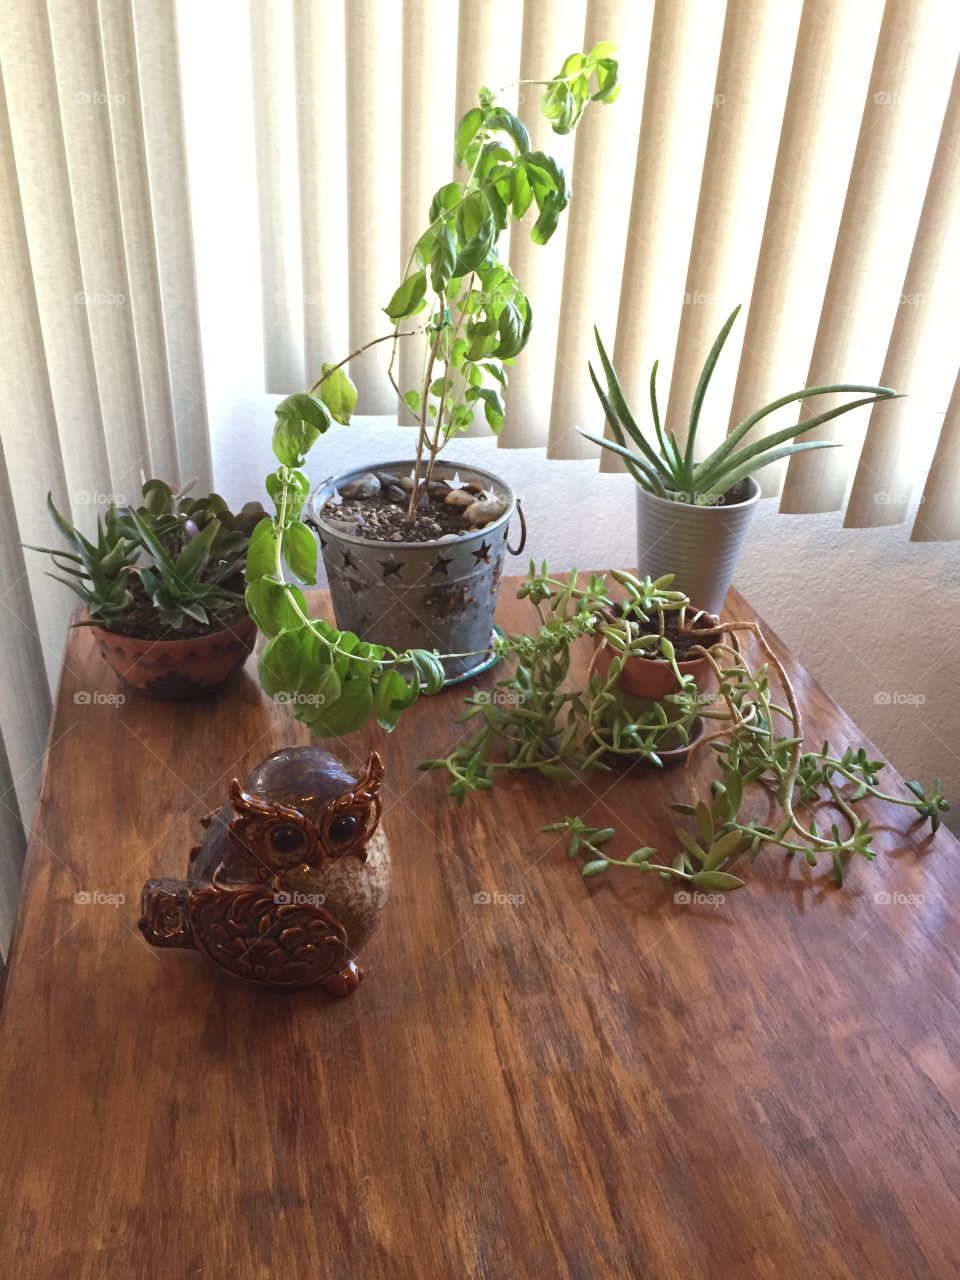 House plants and ceramic owl on wood table